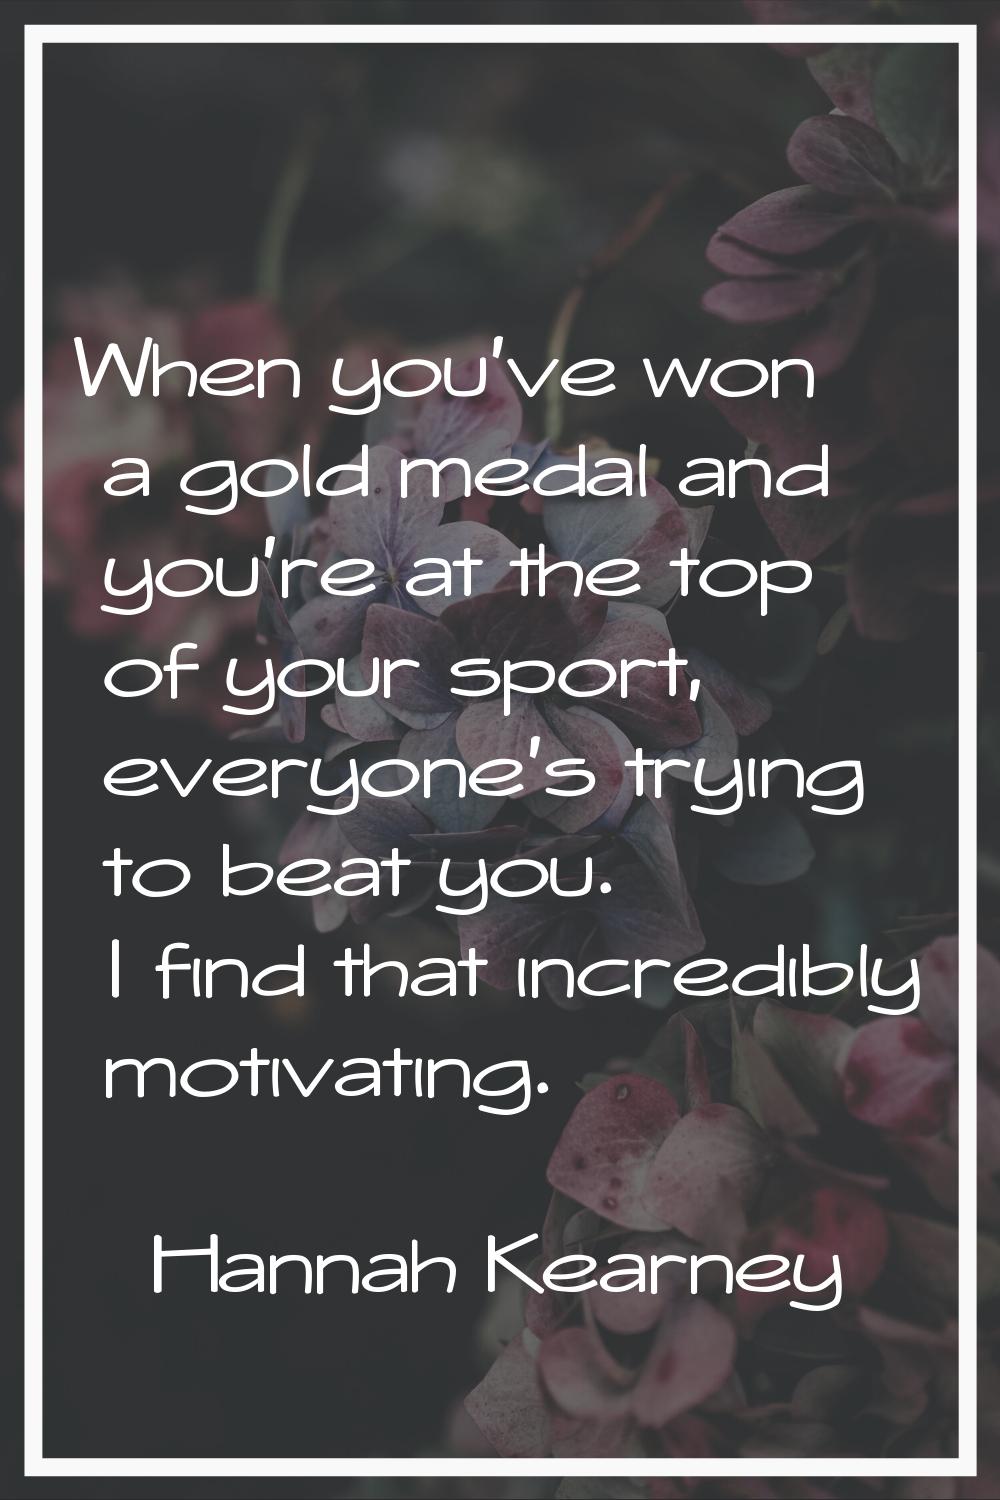 When you've won a gold medal and you're at the top of your sport, everyone's trying to beat you. I 